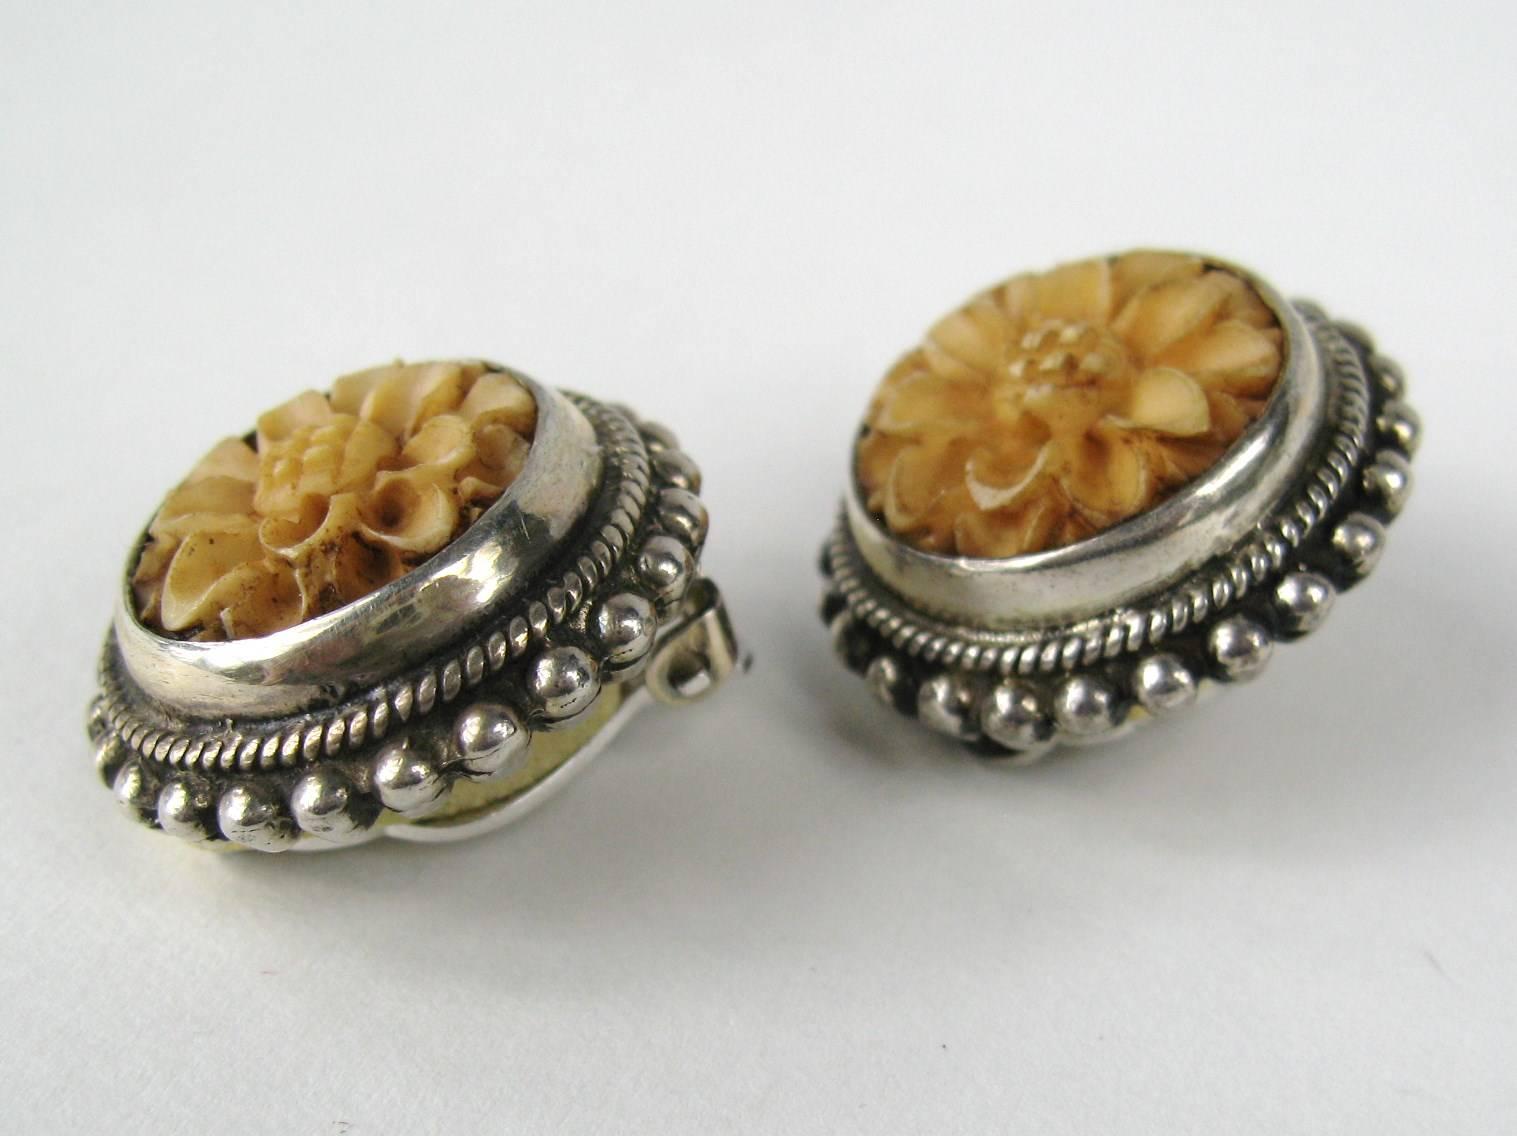 Pair of new old stock Stephen Dweck sterling silver earrings Clip on's Measuring 1 inch round. These are New Old Stock, never worn. This is out of a massive collection of Hopi, Zuni, Navajo, Southwestern, sterling silver, costume jewelry and fine